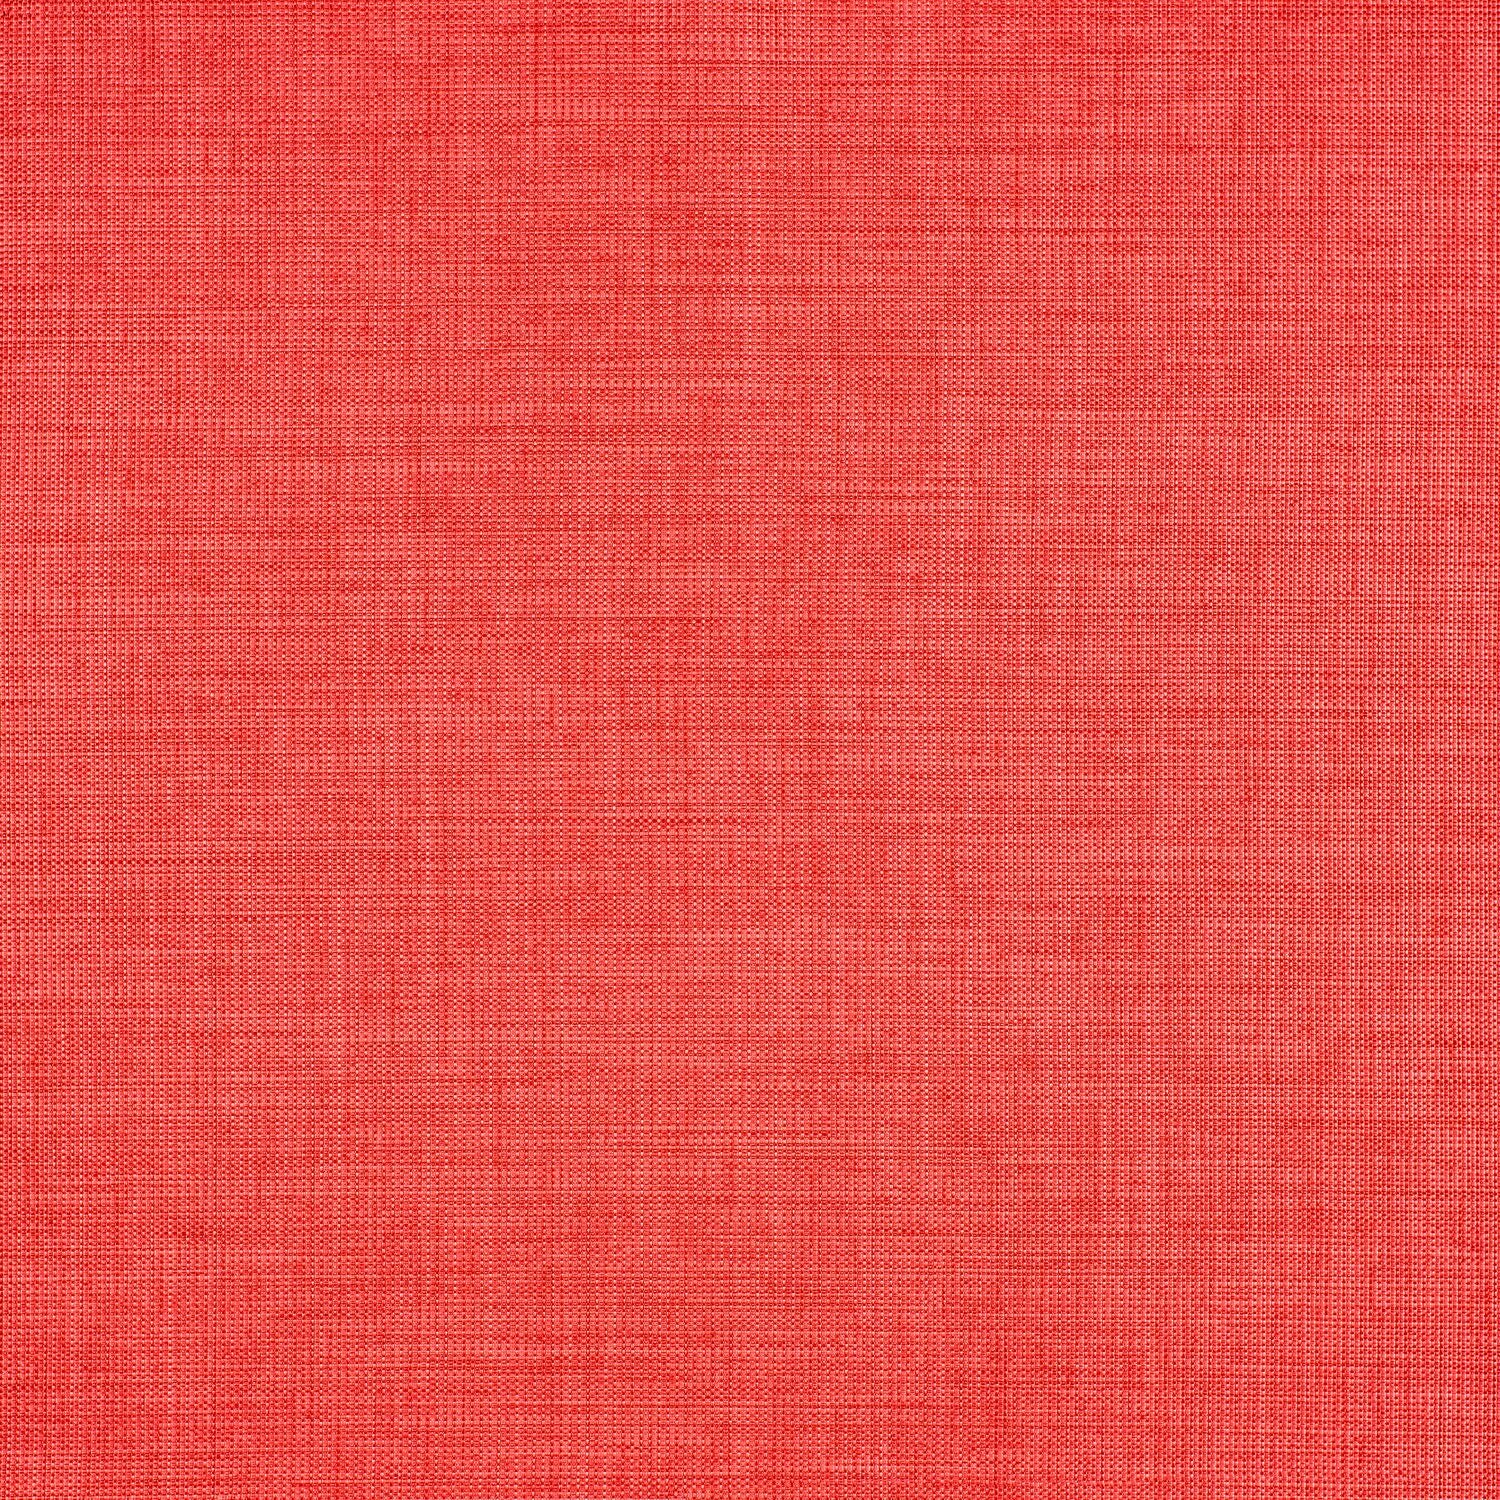 Complect - Highlighter Pink - 1032 - 08 - Half Yard